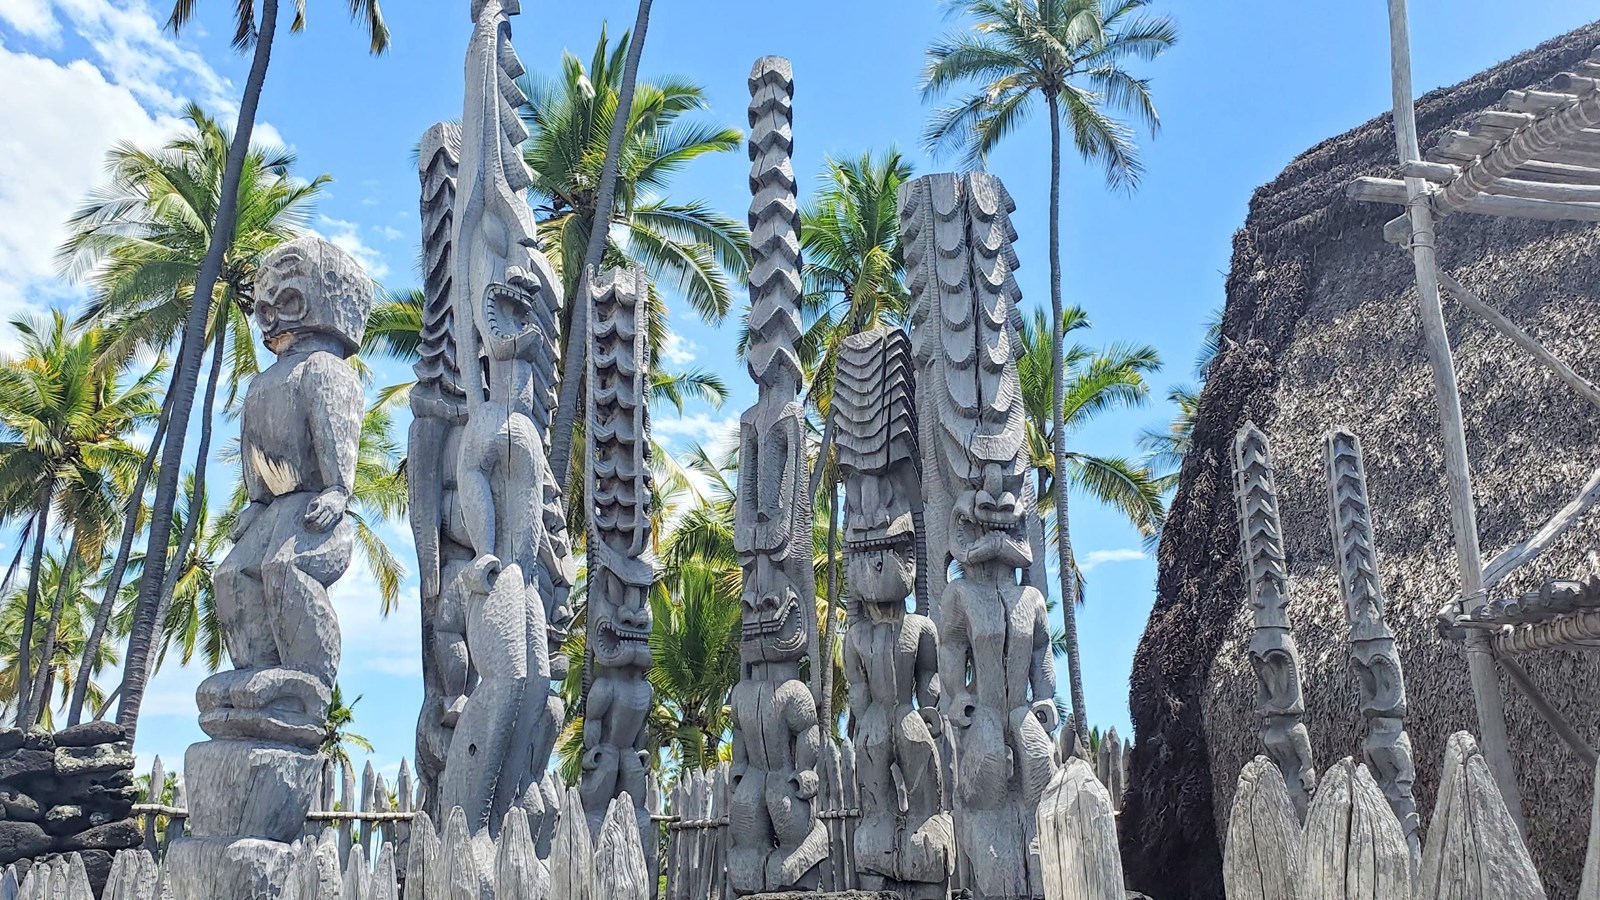 A semi circle of carved kiʻi images stand tall within the wooden palisade of Hale o Keawe